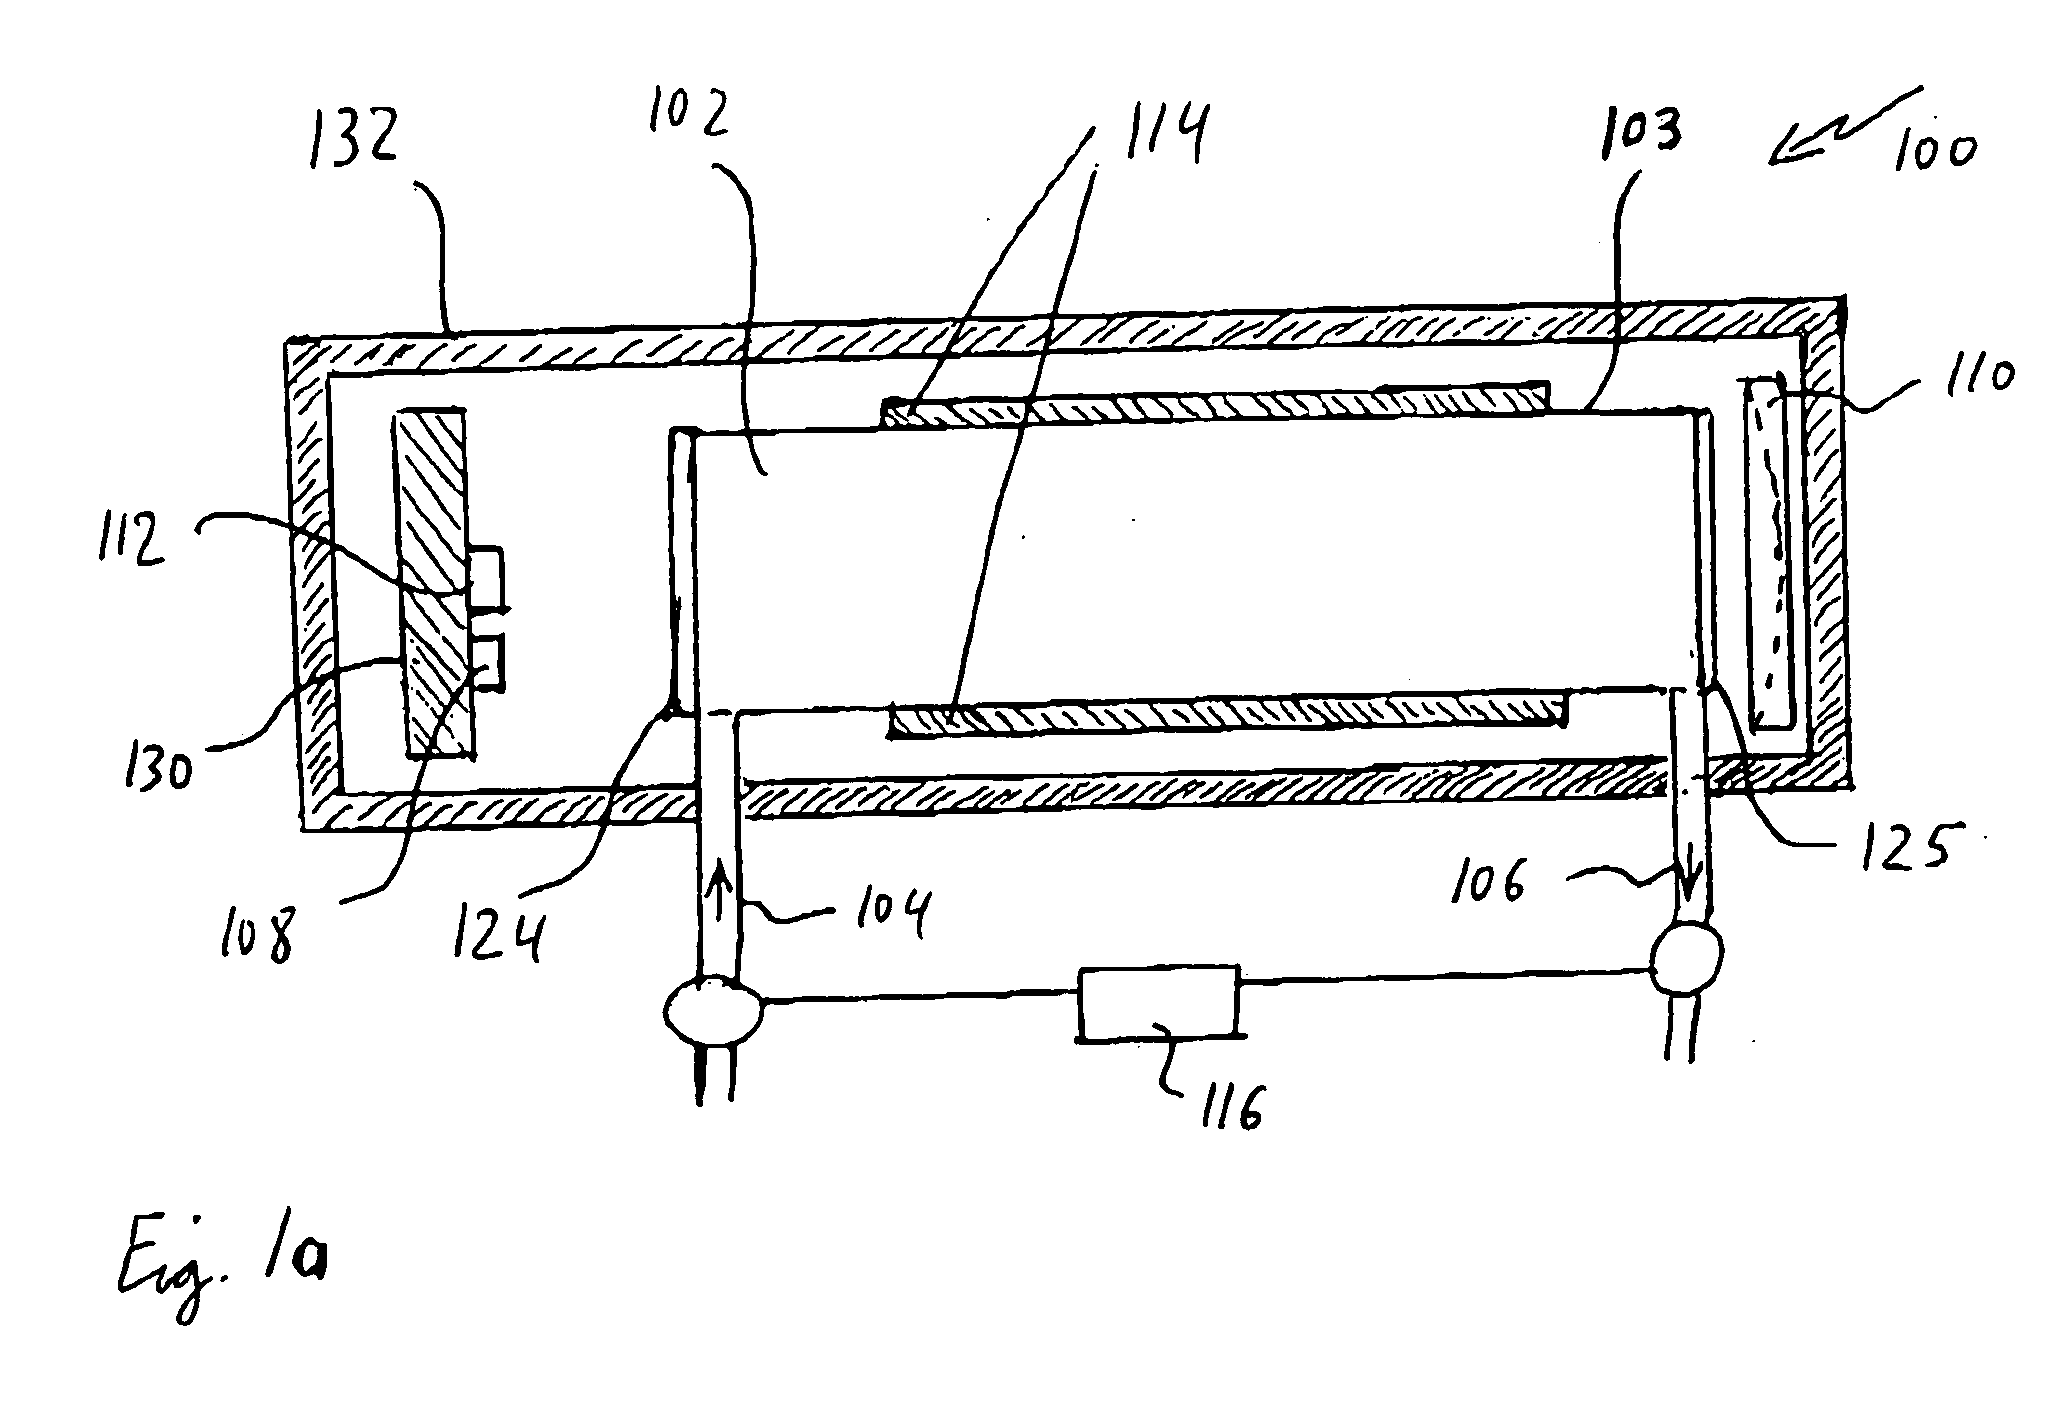 Apparatus and method for controlling atmospheres in heat treating of metals